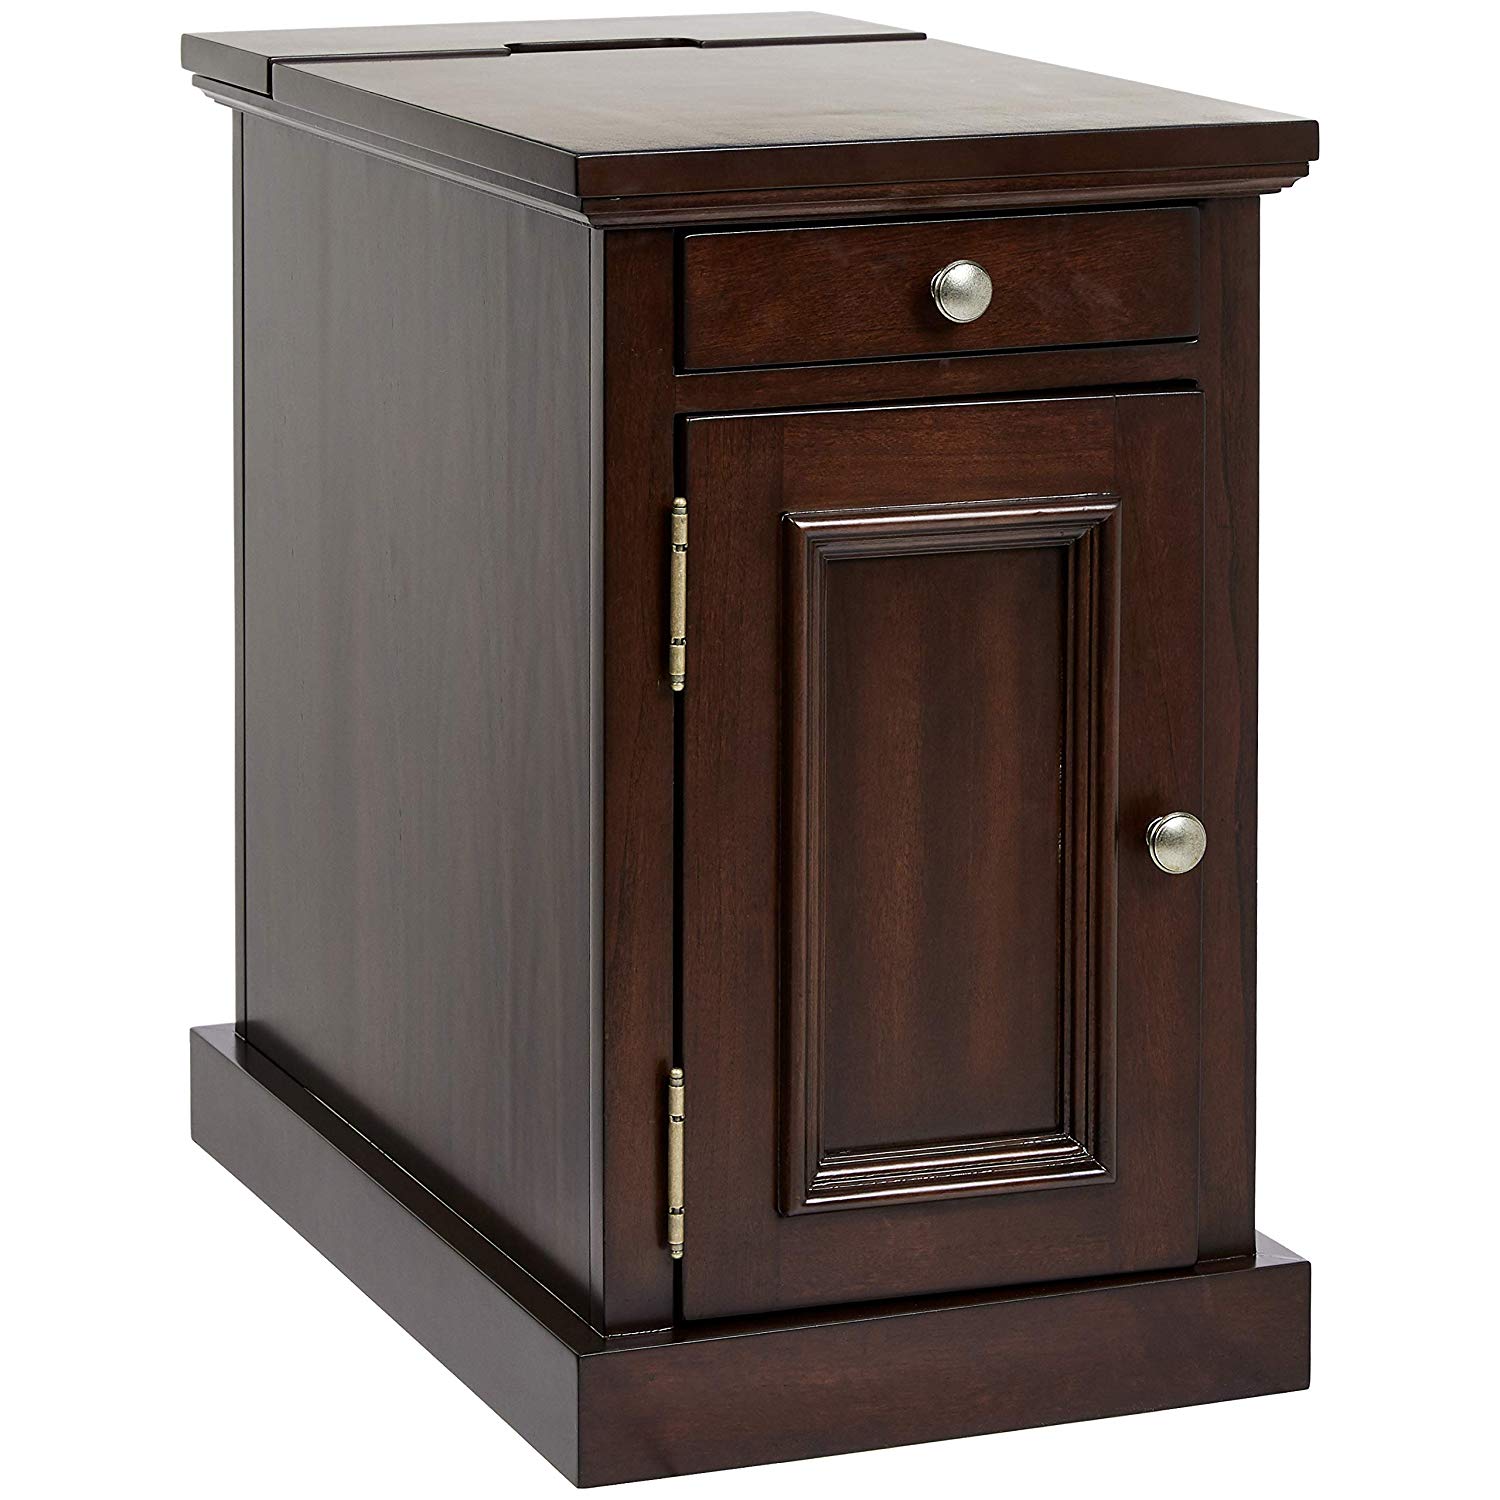 ball cast harriet wood end table with drawer cabinet and built power strip roasted brown kitchen dining what size sofa for living room rustic nesting tables large corner bedroom